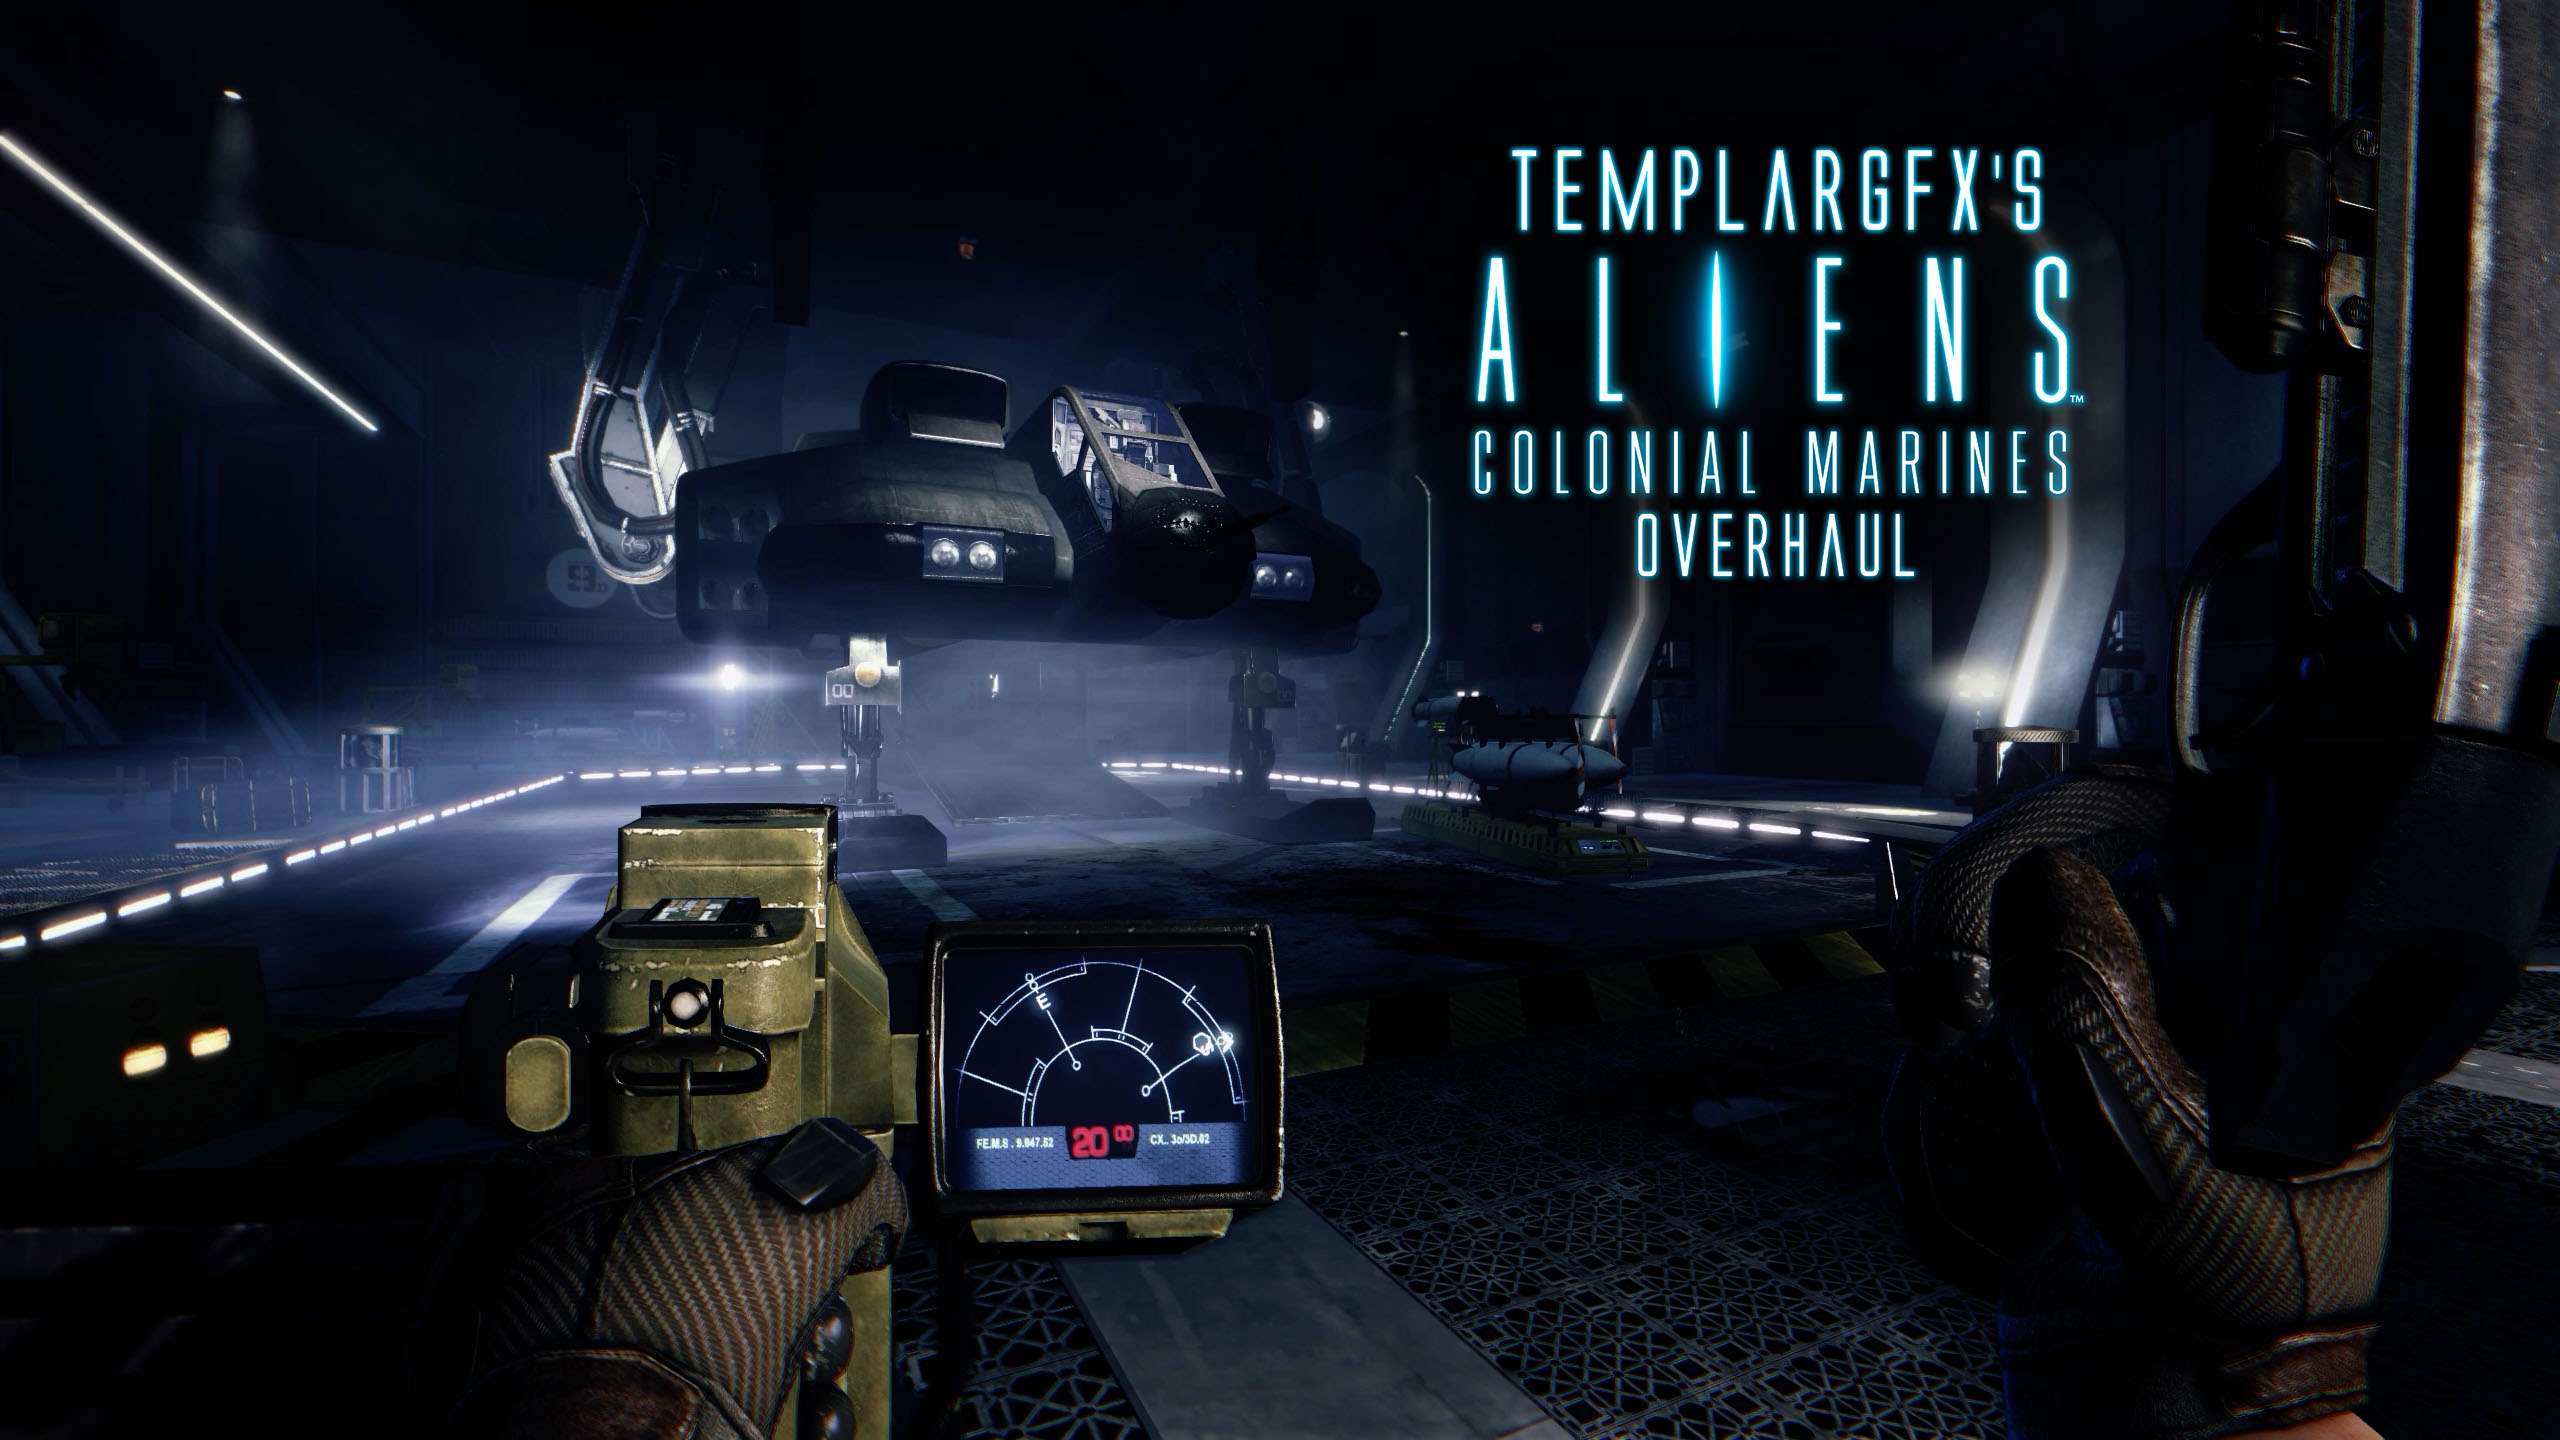 Download now massive 3. 8gb aliens: colonial marines pc patch on steam.